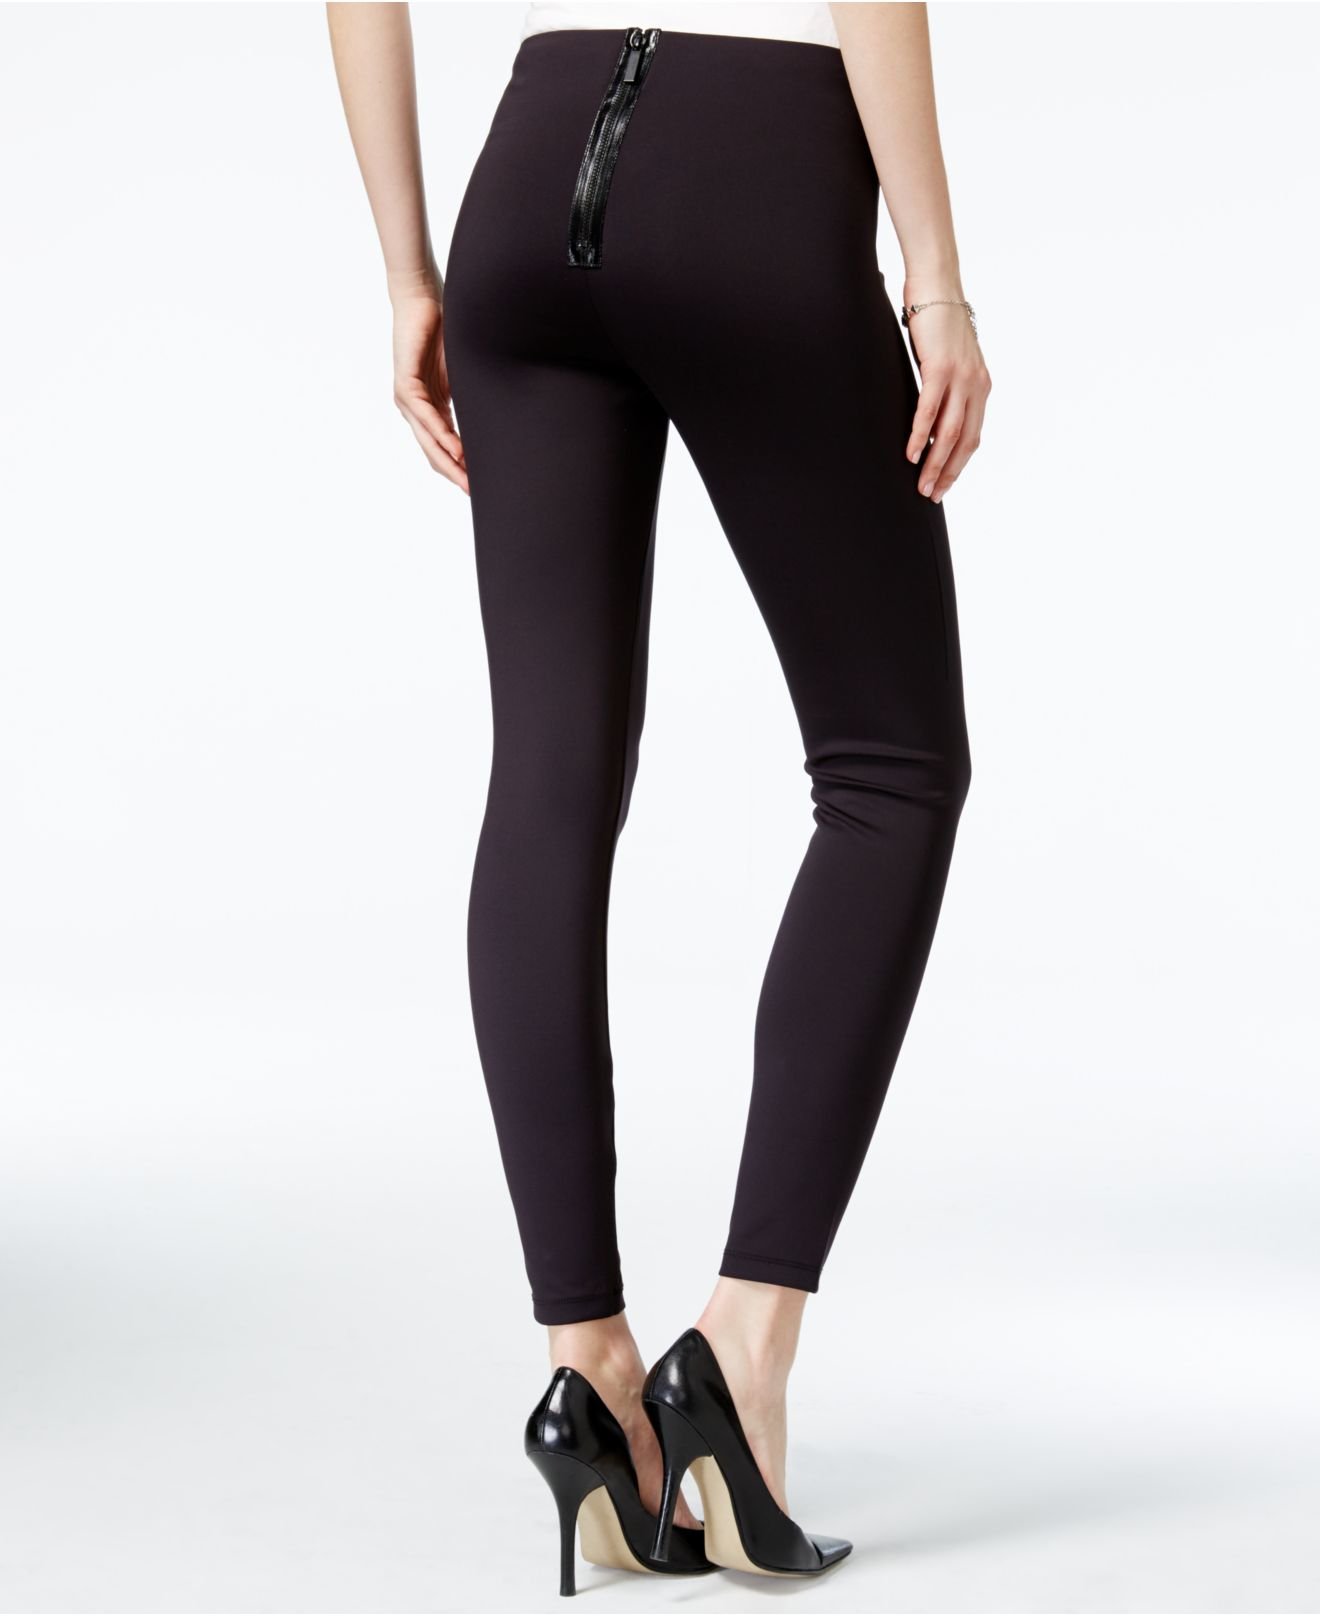 Furry Leggings For Women  International Society of Precision Agriculture